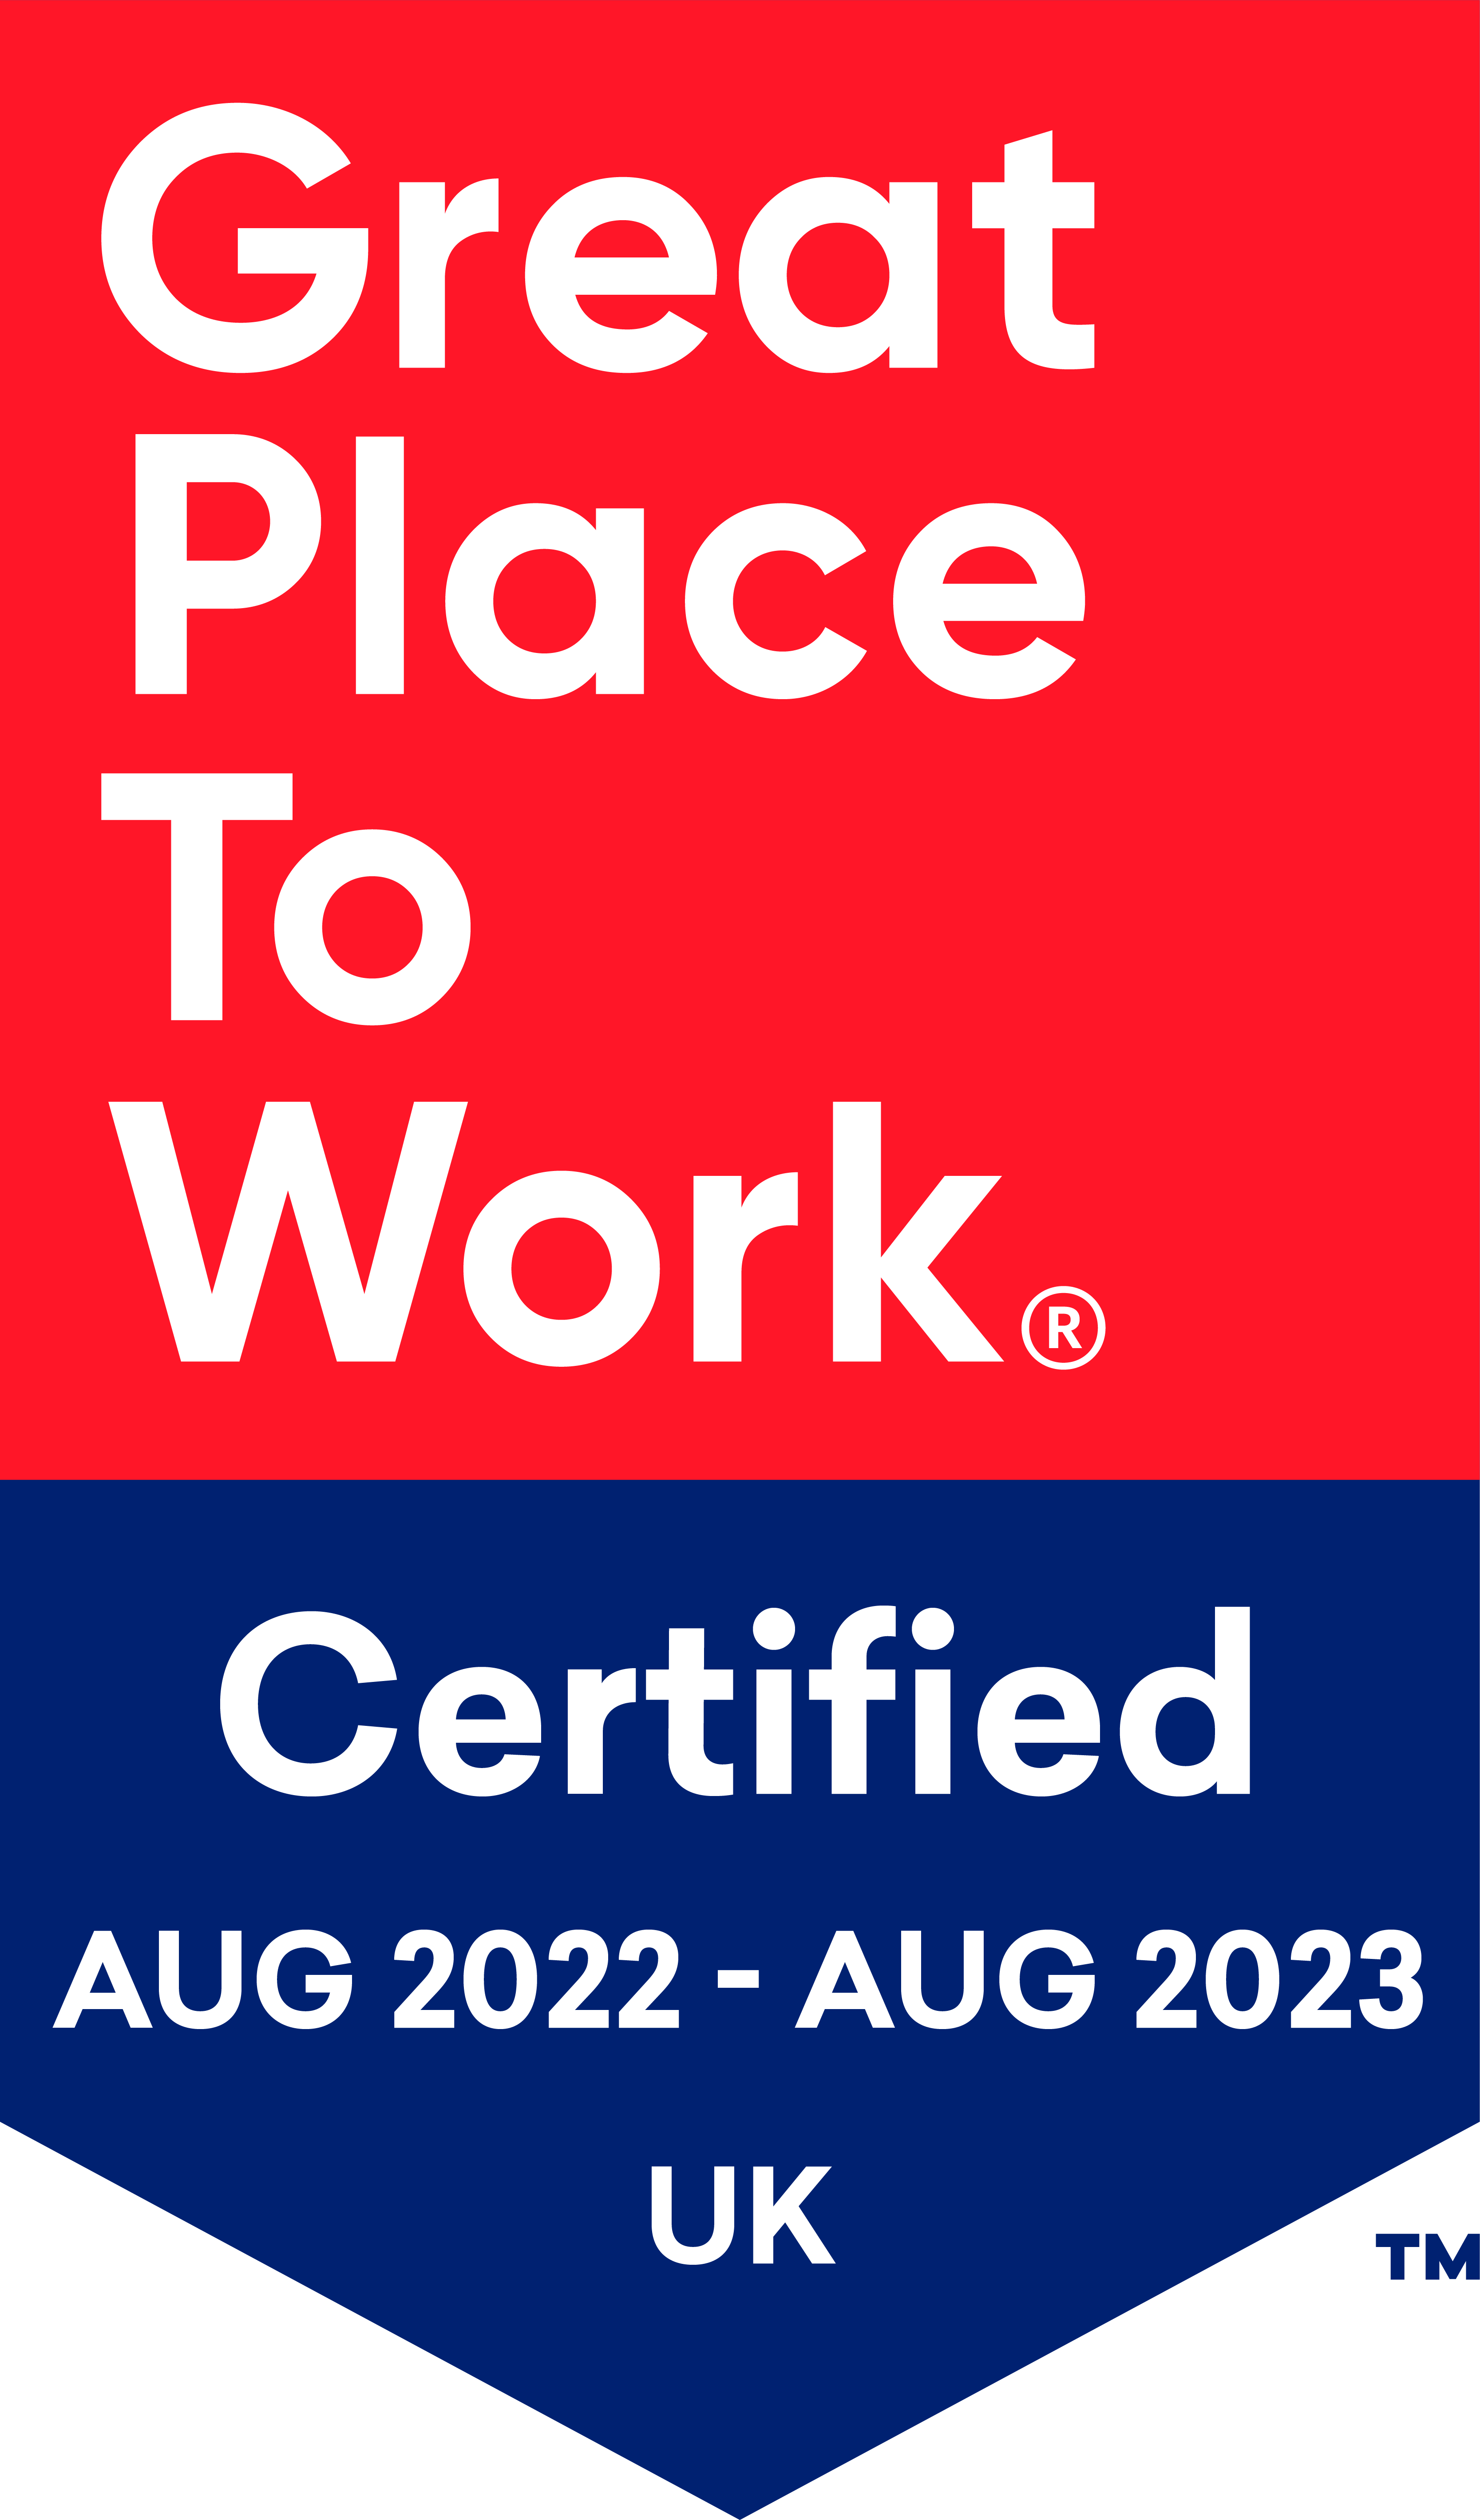 Great place to work certified 2022